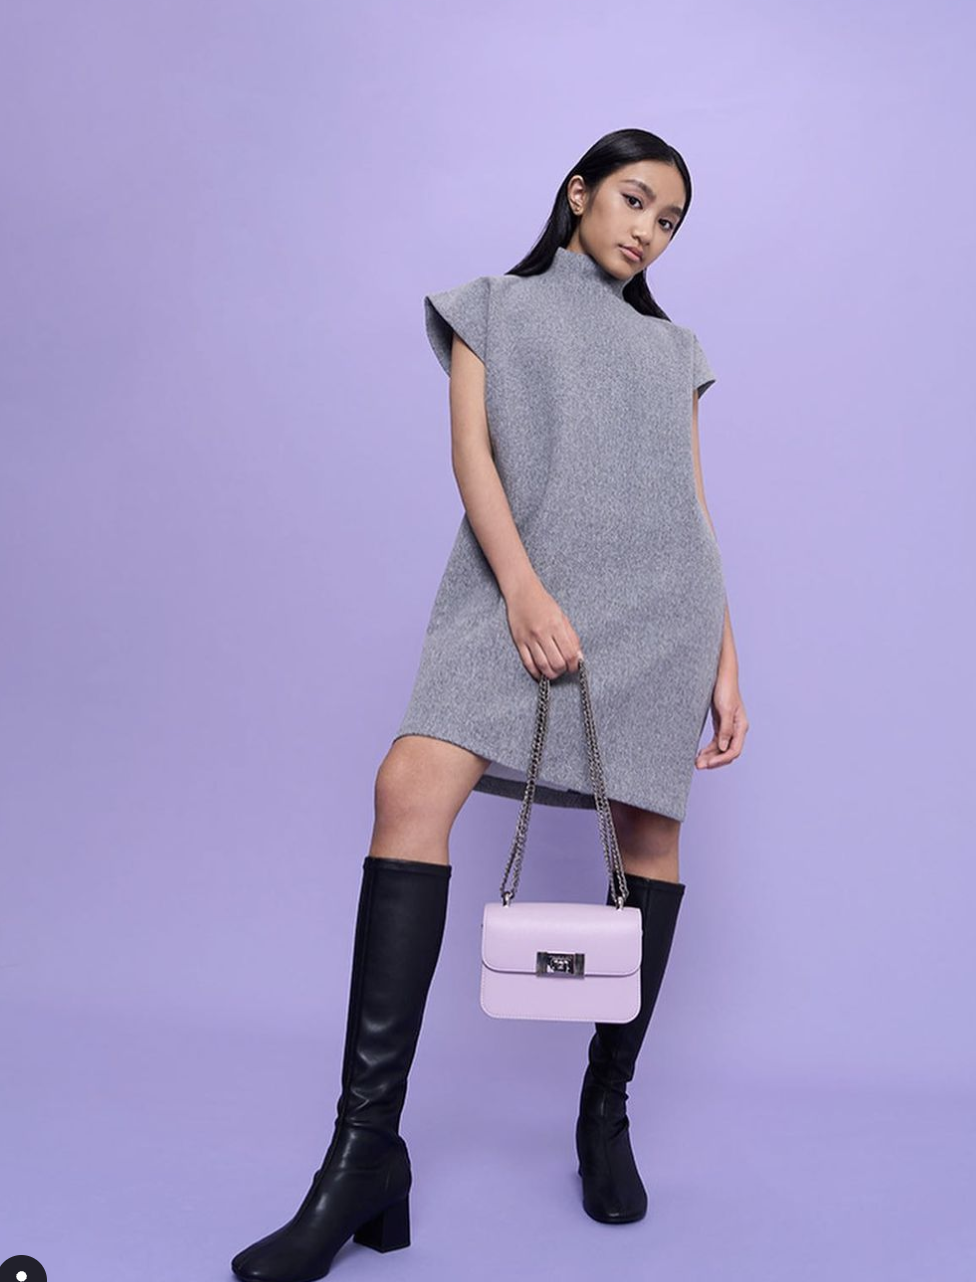 17-year-old teen now charles & keith's brand ambassador